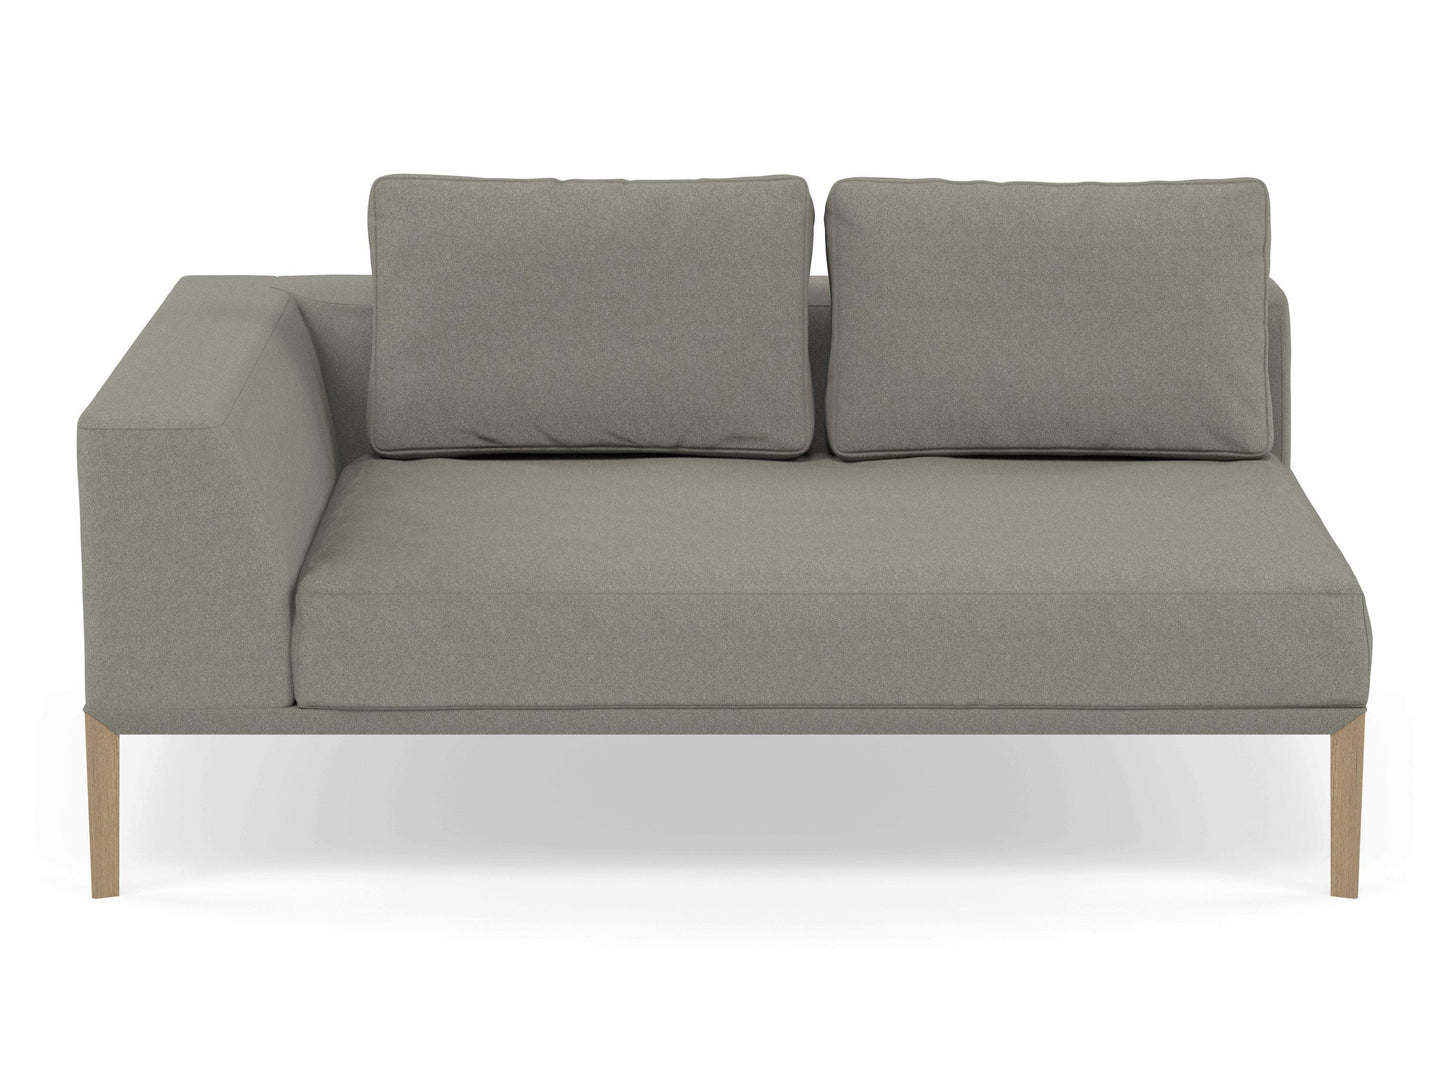 Modern 2 Seater Chaise Lounge Style Sofa with Right Armrest in Silver Grey Fabric-Natural Oak-Distinct Designs (London) Ltd